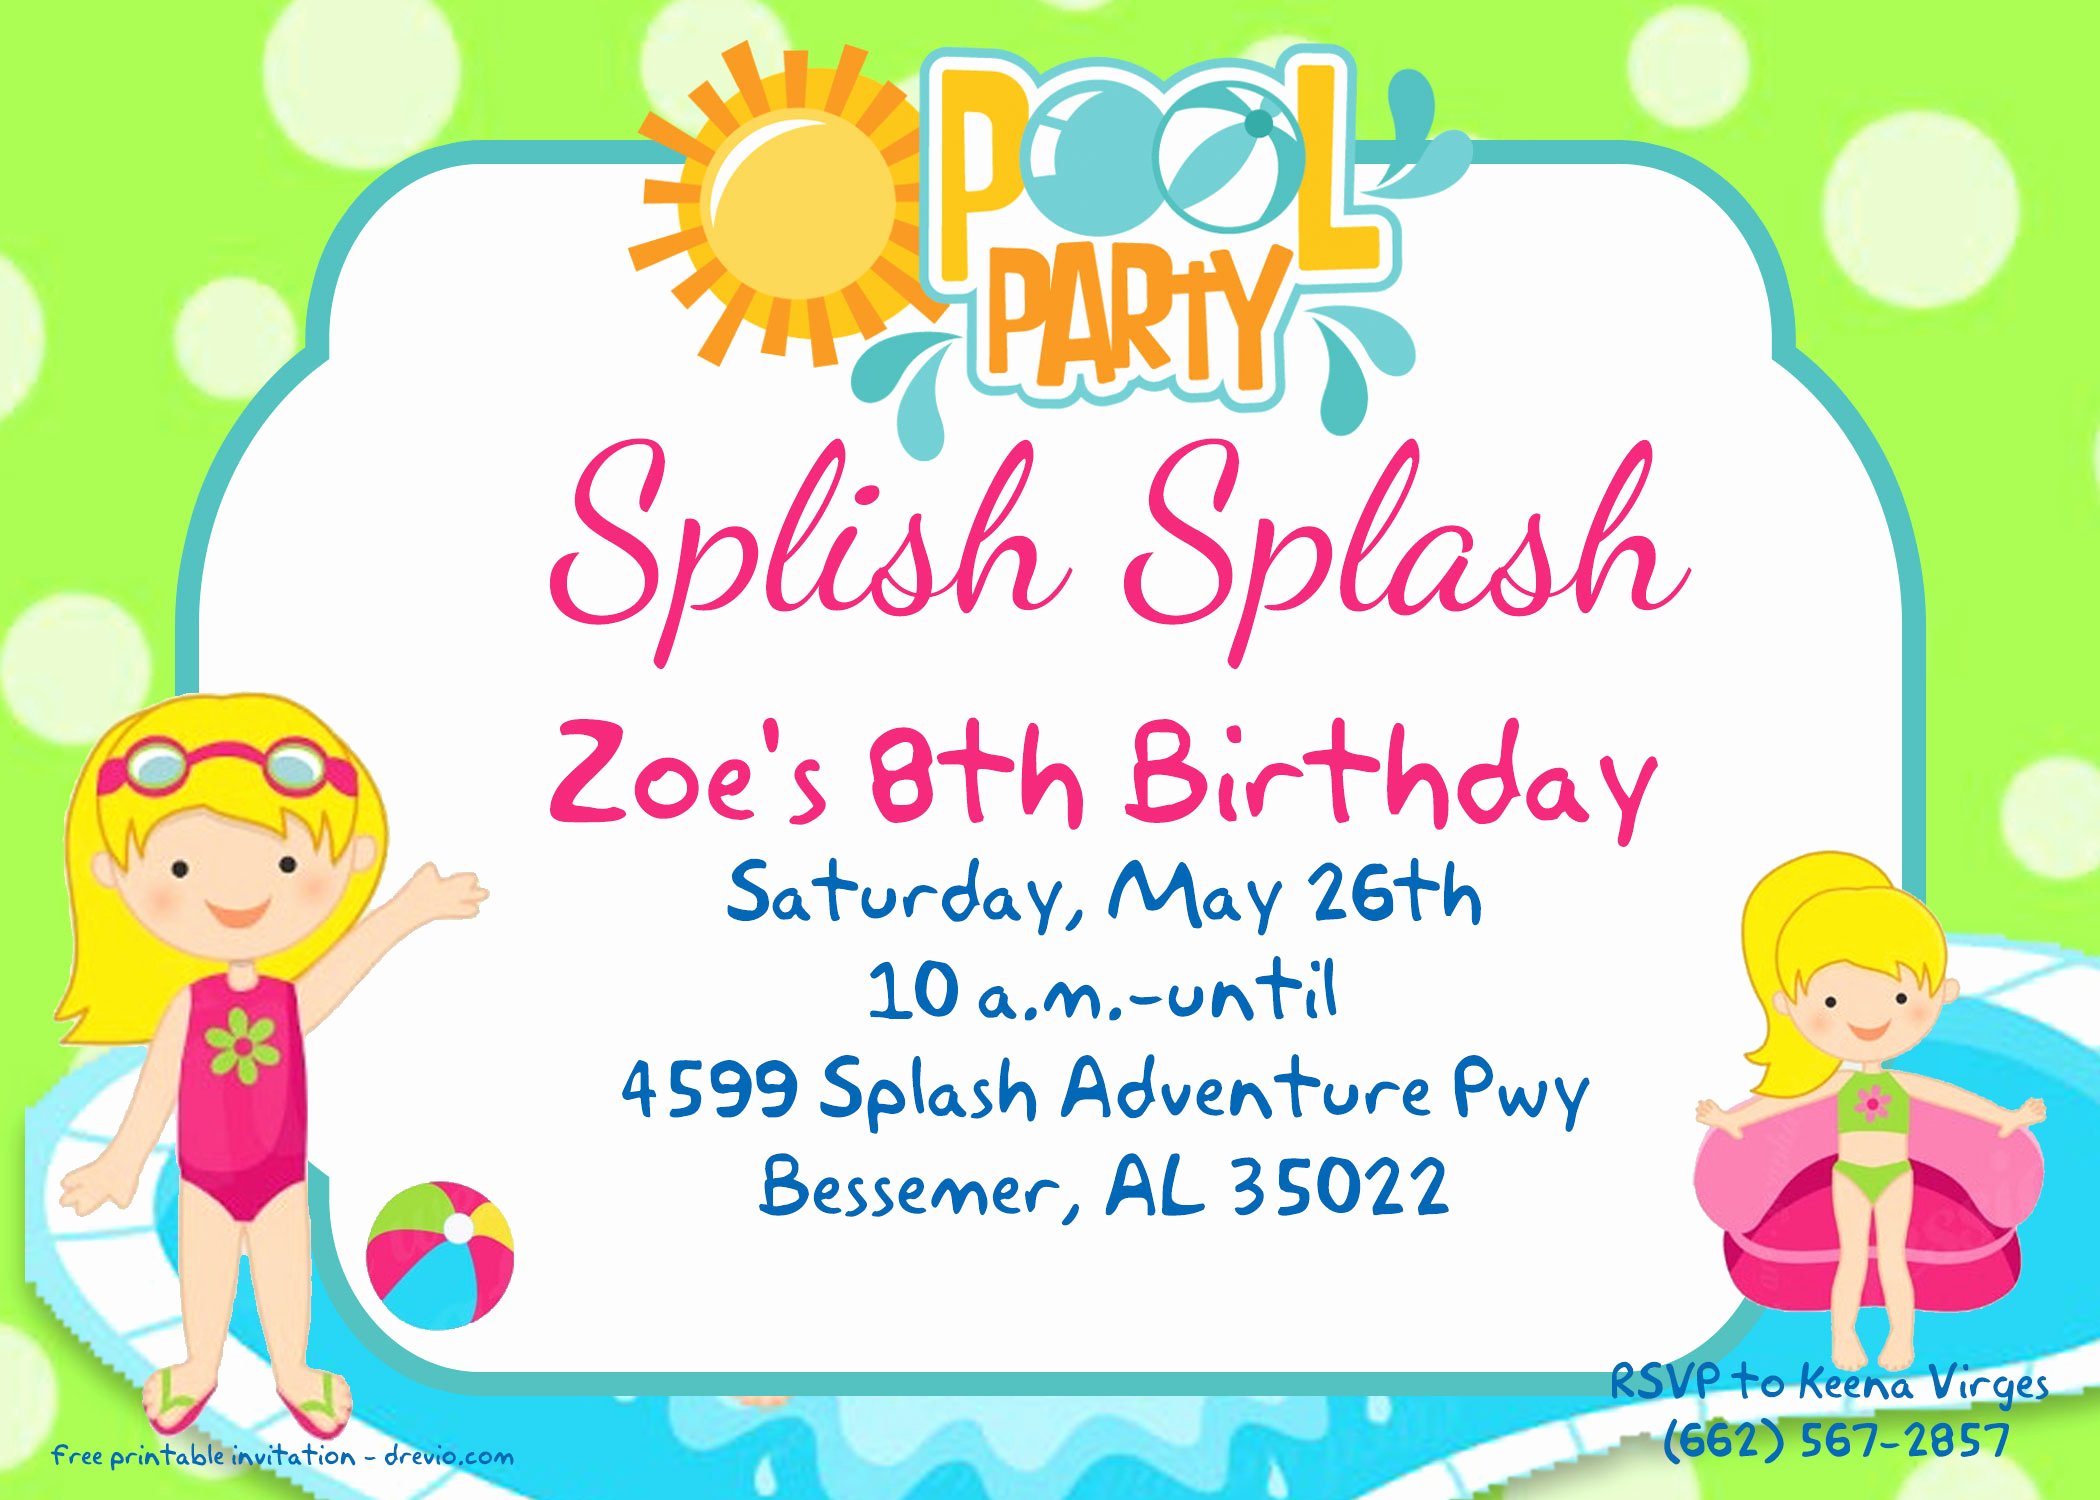 Blank Pool Party Invitations Awesome Free Printable Pool Party for Girls Invitations